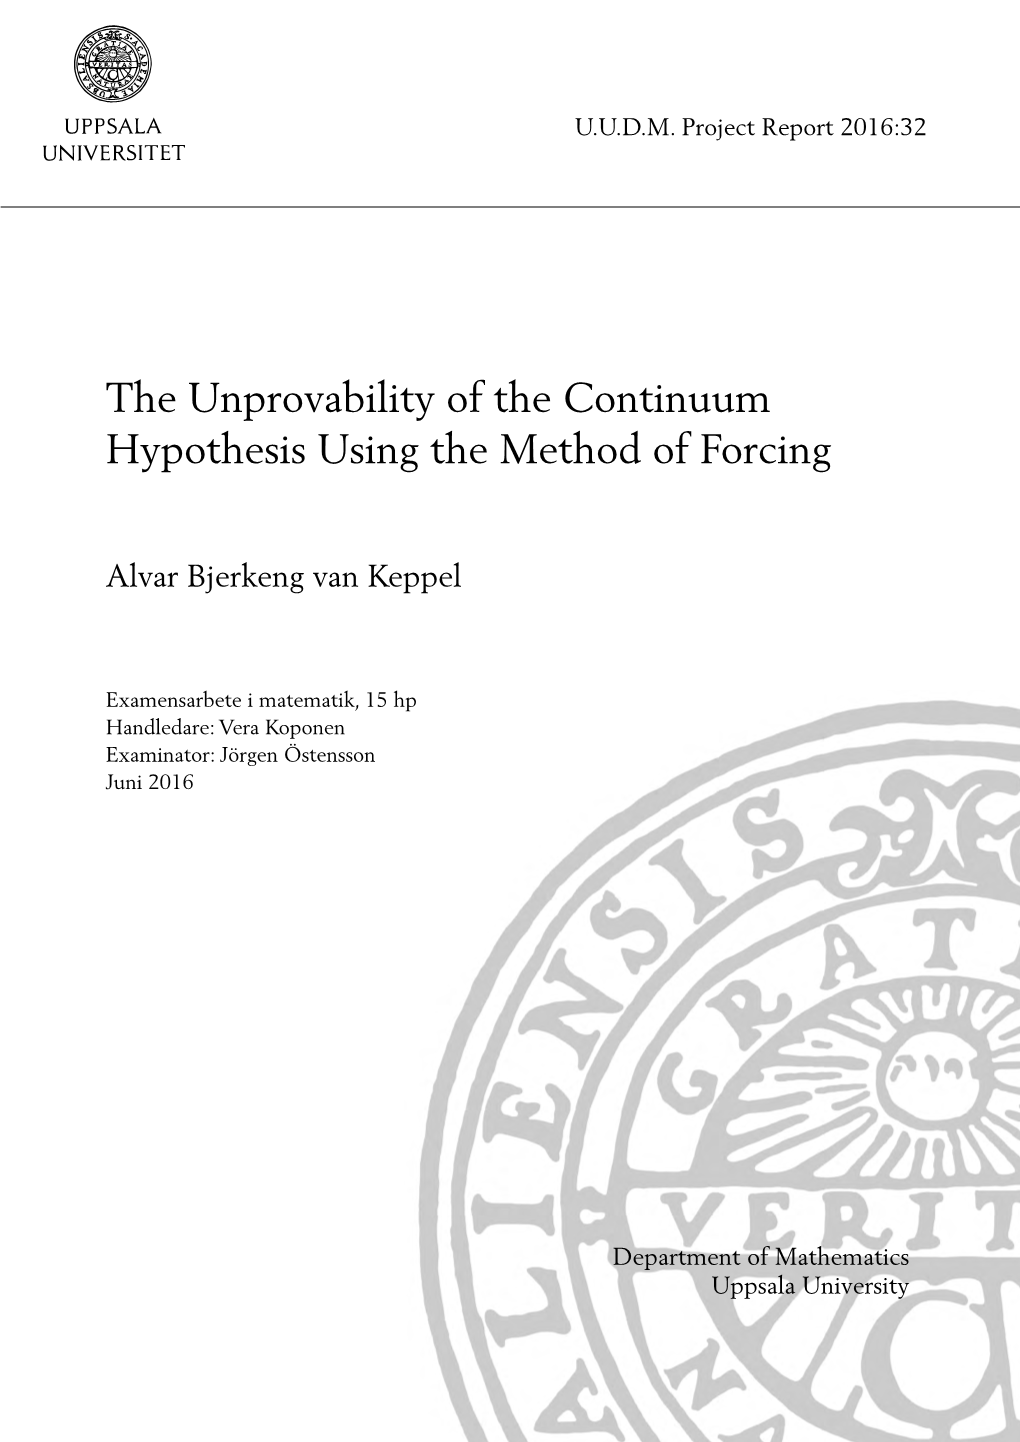 The Unprovability of the Continuum Hypothesis Using the Method of Forcing